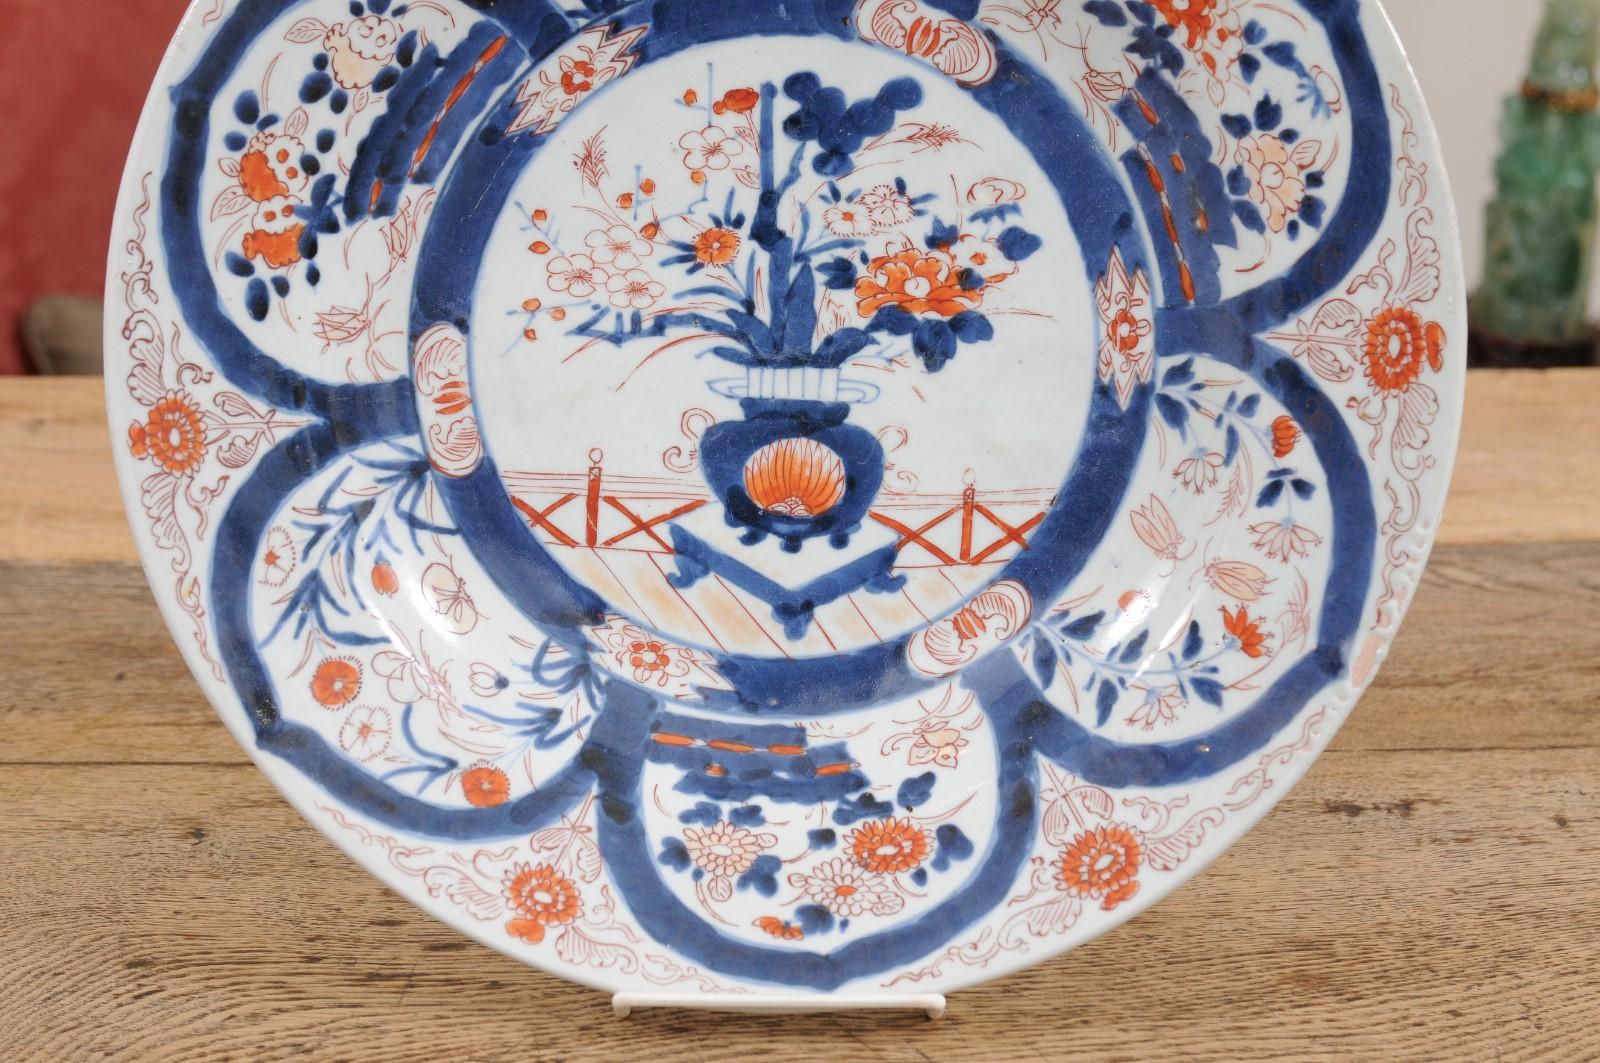 Large 18th Century Chinese Export Imari Porcelain Charger For Sale 2